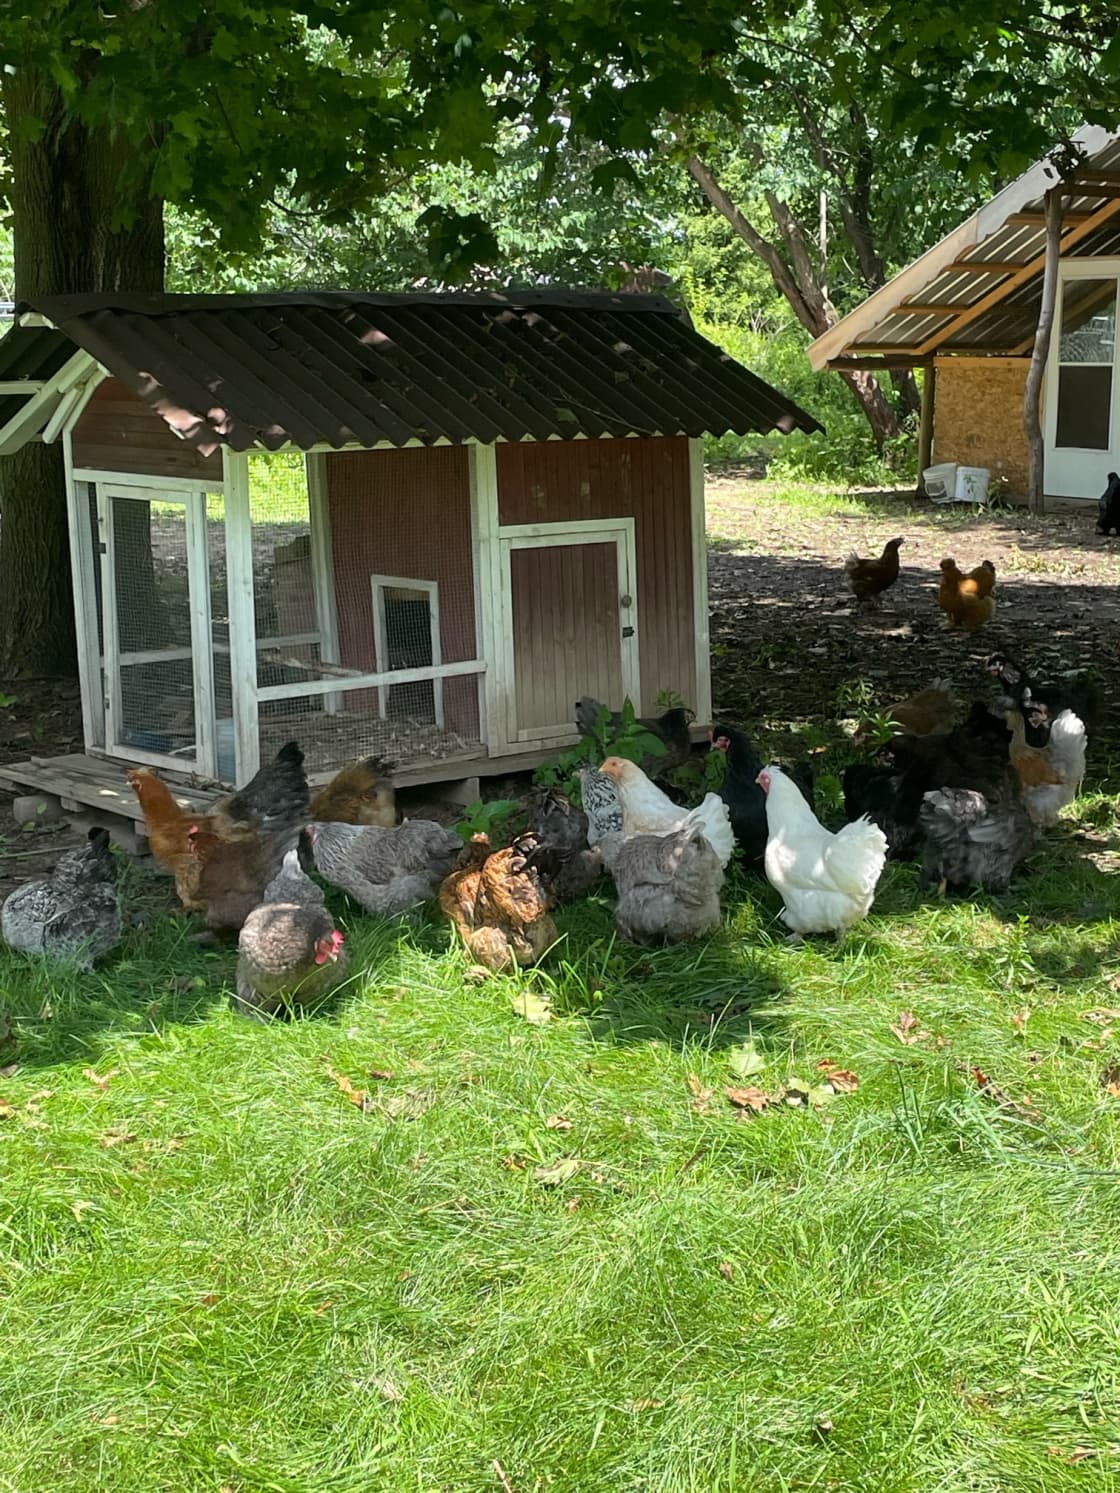 Our happy chickens - ask about taking home a dozen eggs!